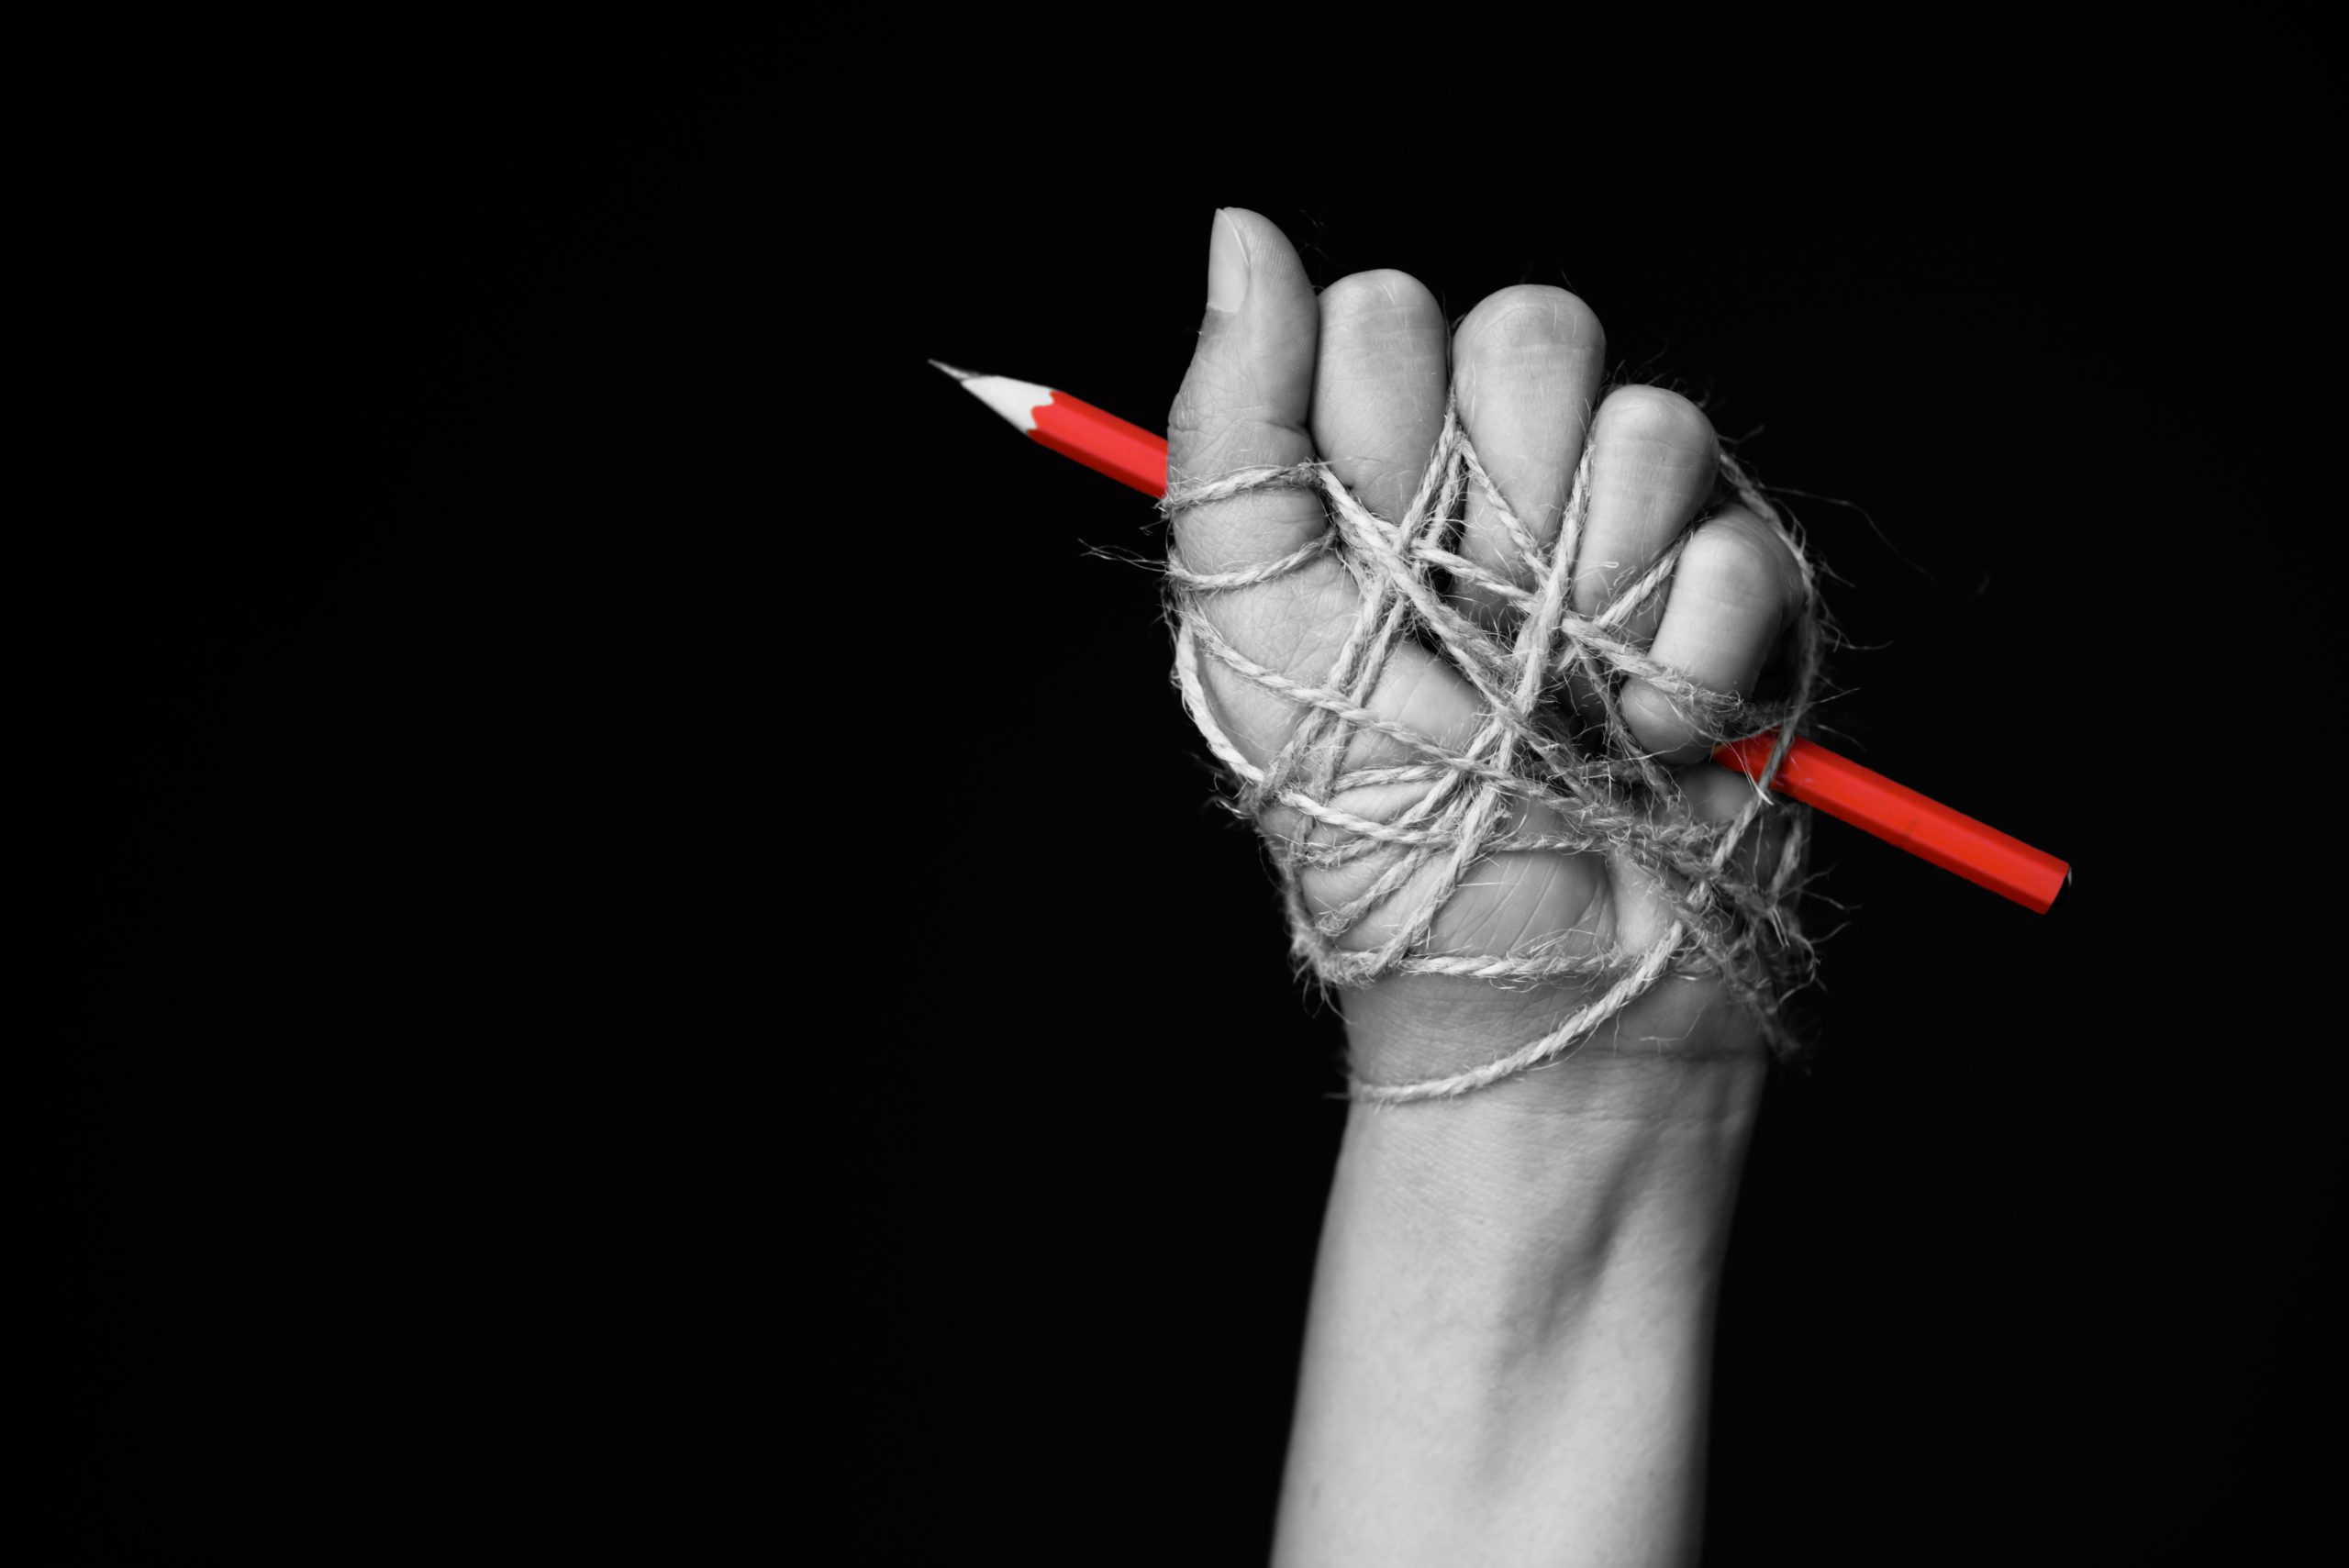 Hand,With,Red,Pencil,Tied,With,Rope,,Depicting,The,Idea